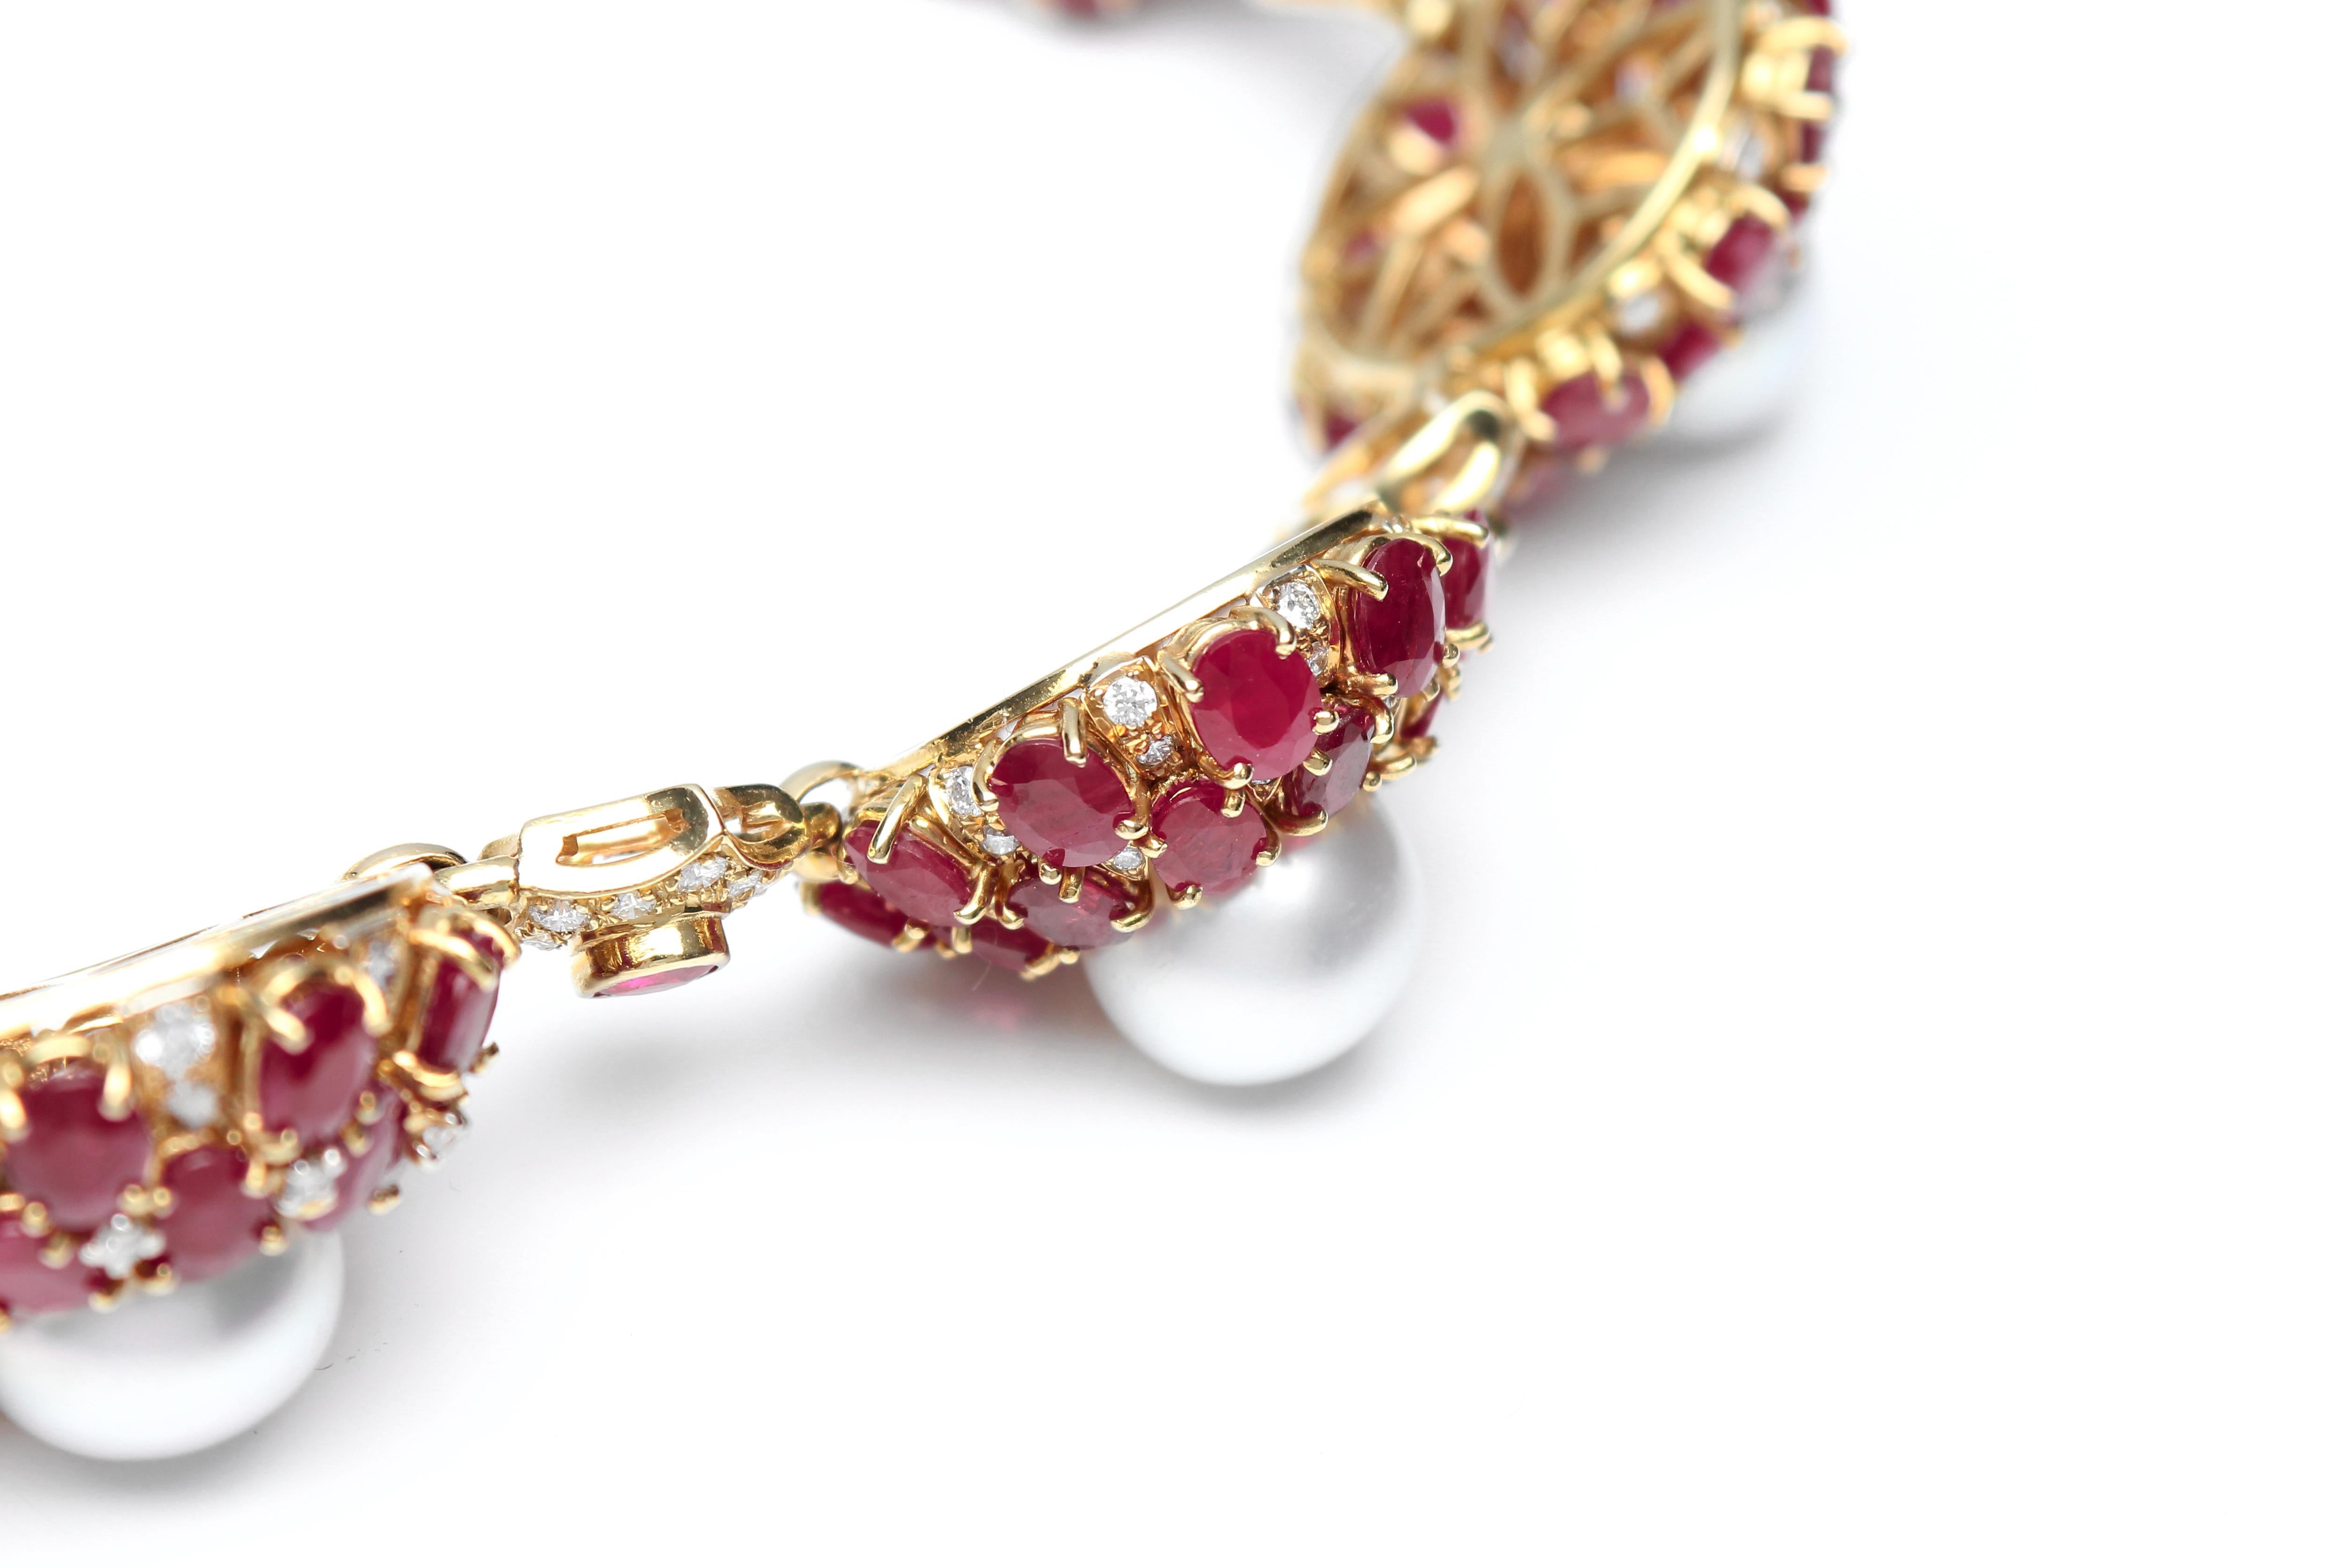 Parure with Rubies, Pearls and Diamonds in 18 Karat Yellow Gold 10